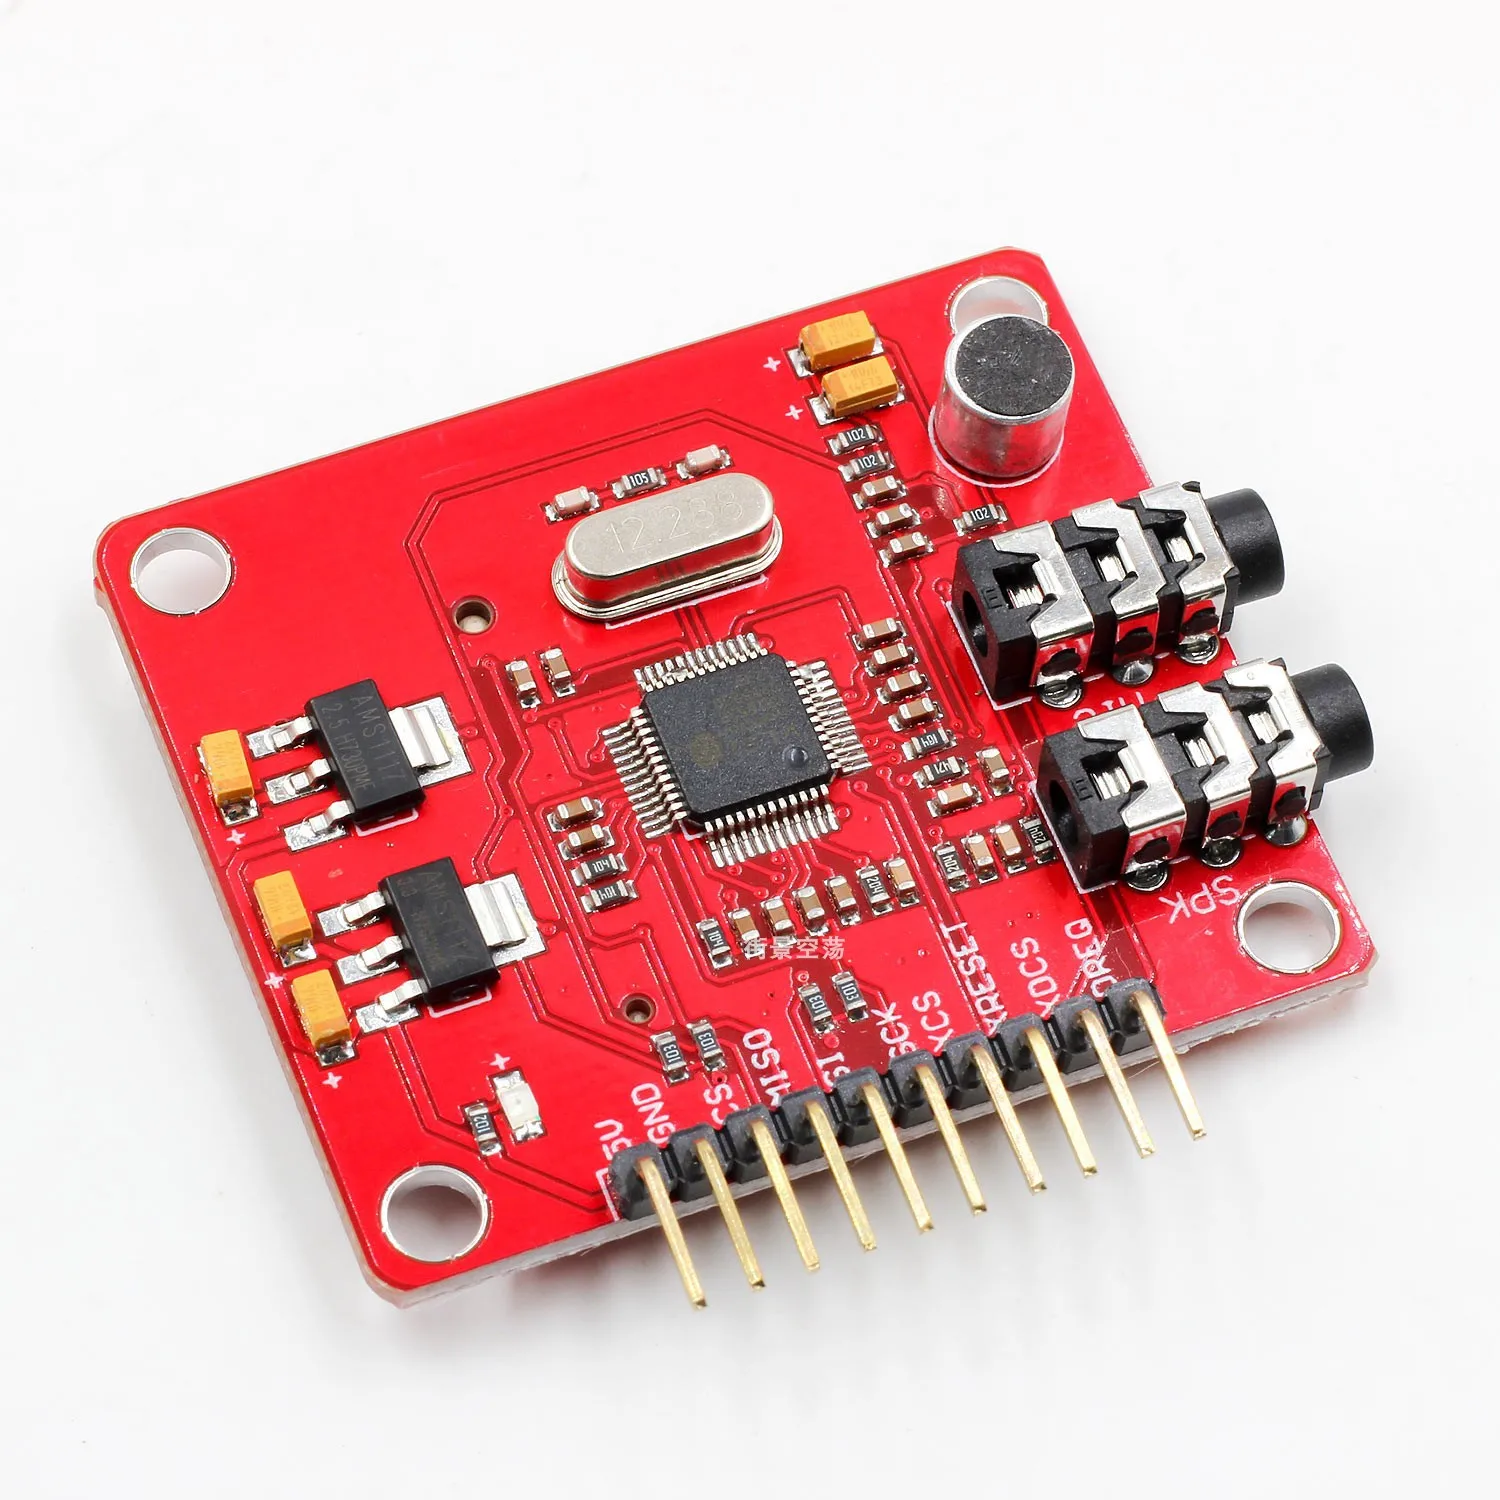 

VS1053 VS1053B MP3 expansion board module with card slot recording board Ogg real-time recording